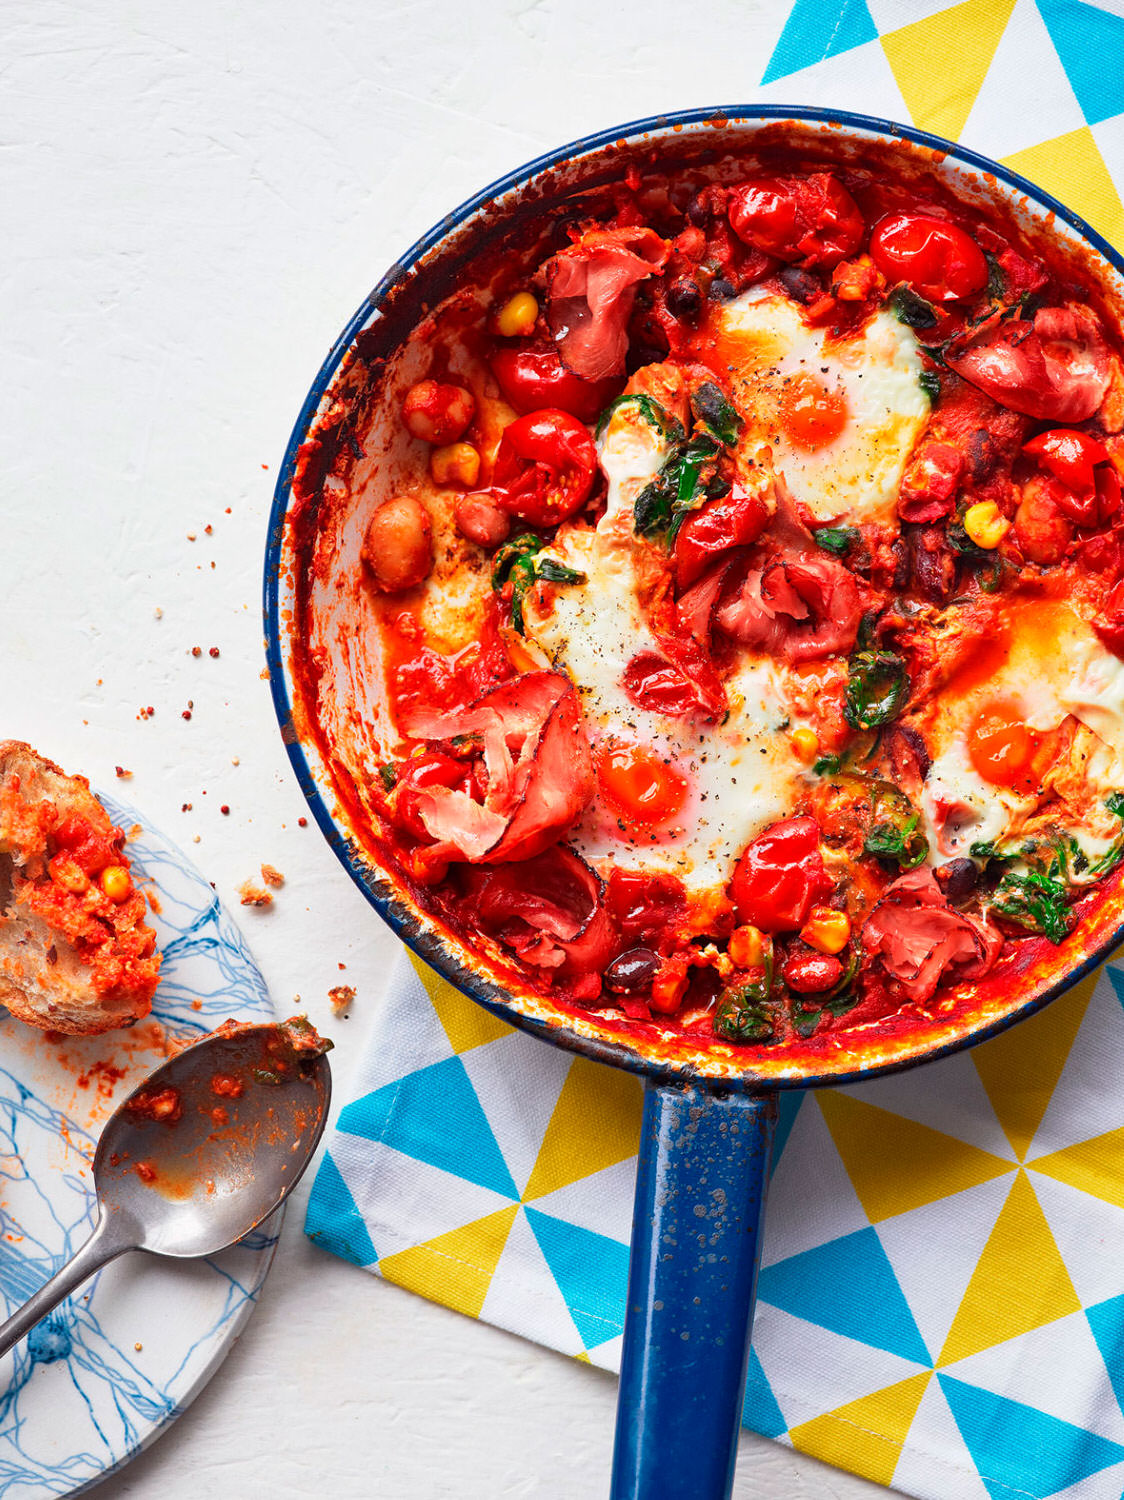 A pan filled with smoky bean and tomato baked eggs served with fresh crusty bread - London Food & Drinks Photographer